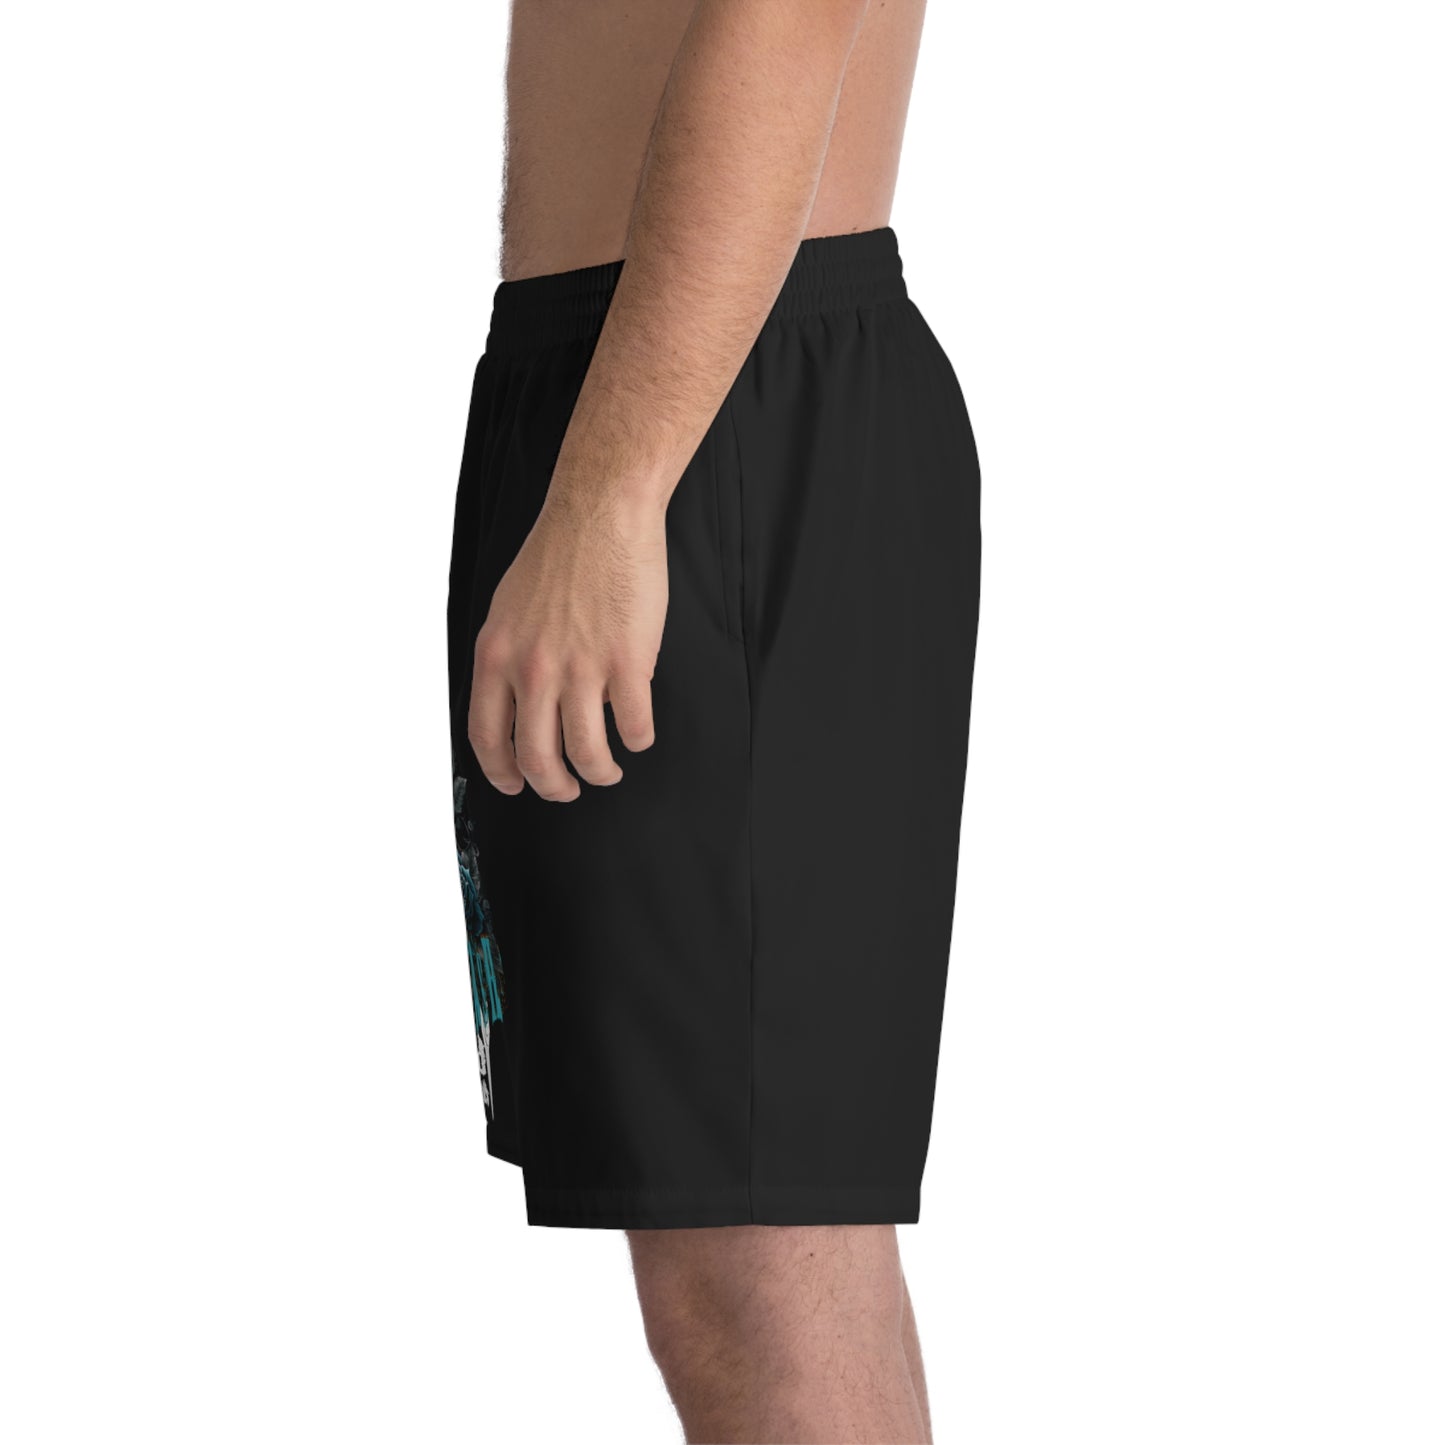 Whisper From The Ashes Beach Shorts